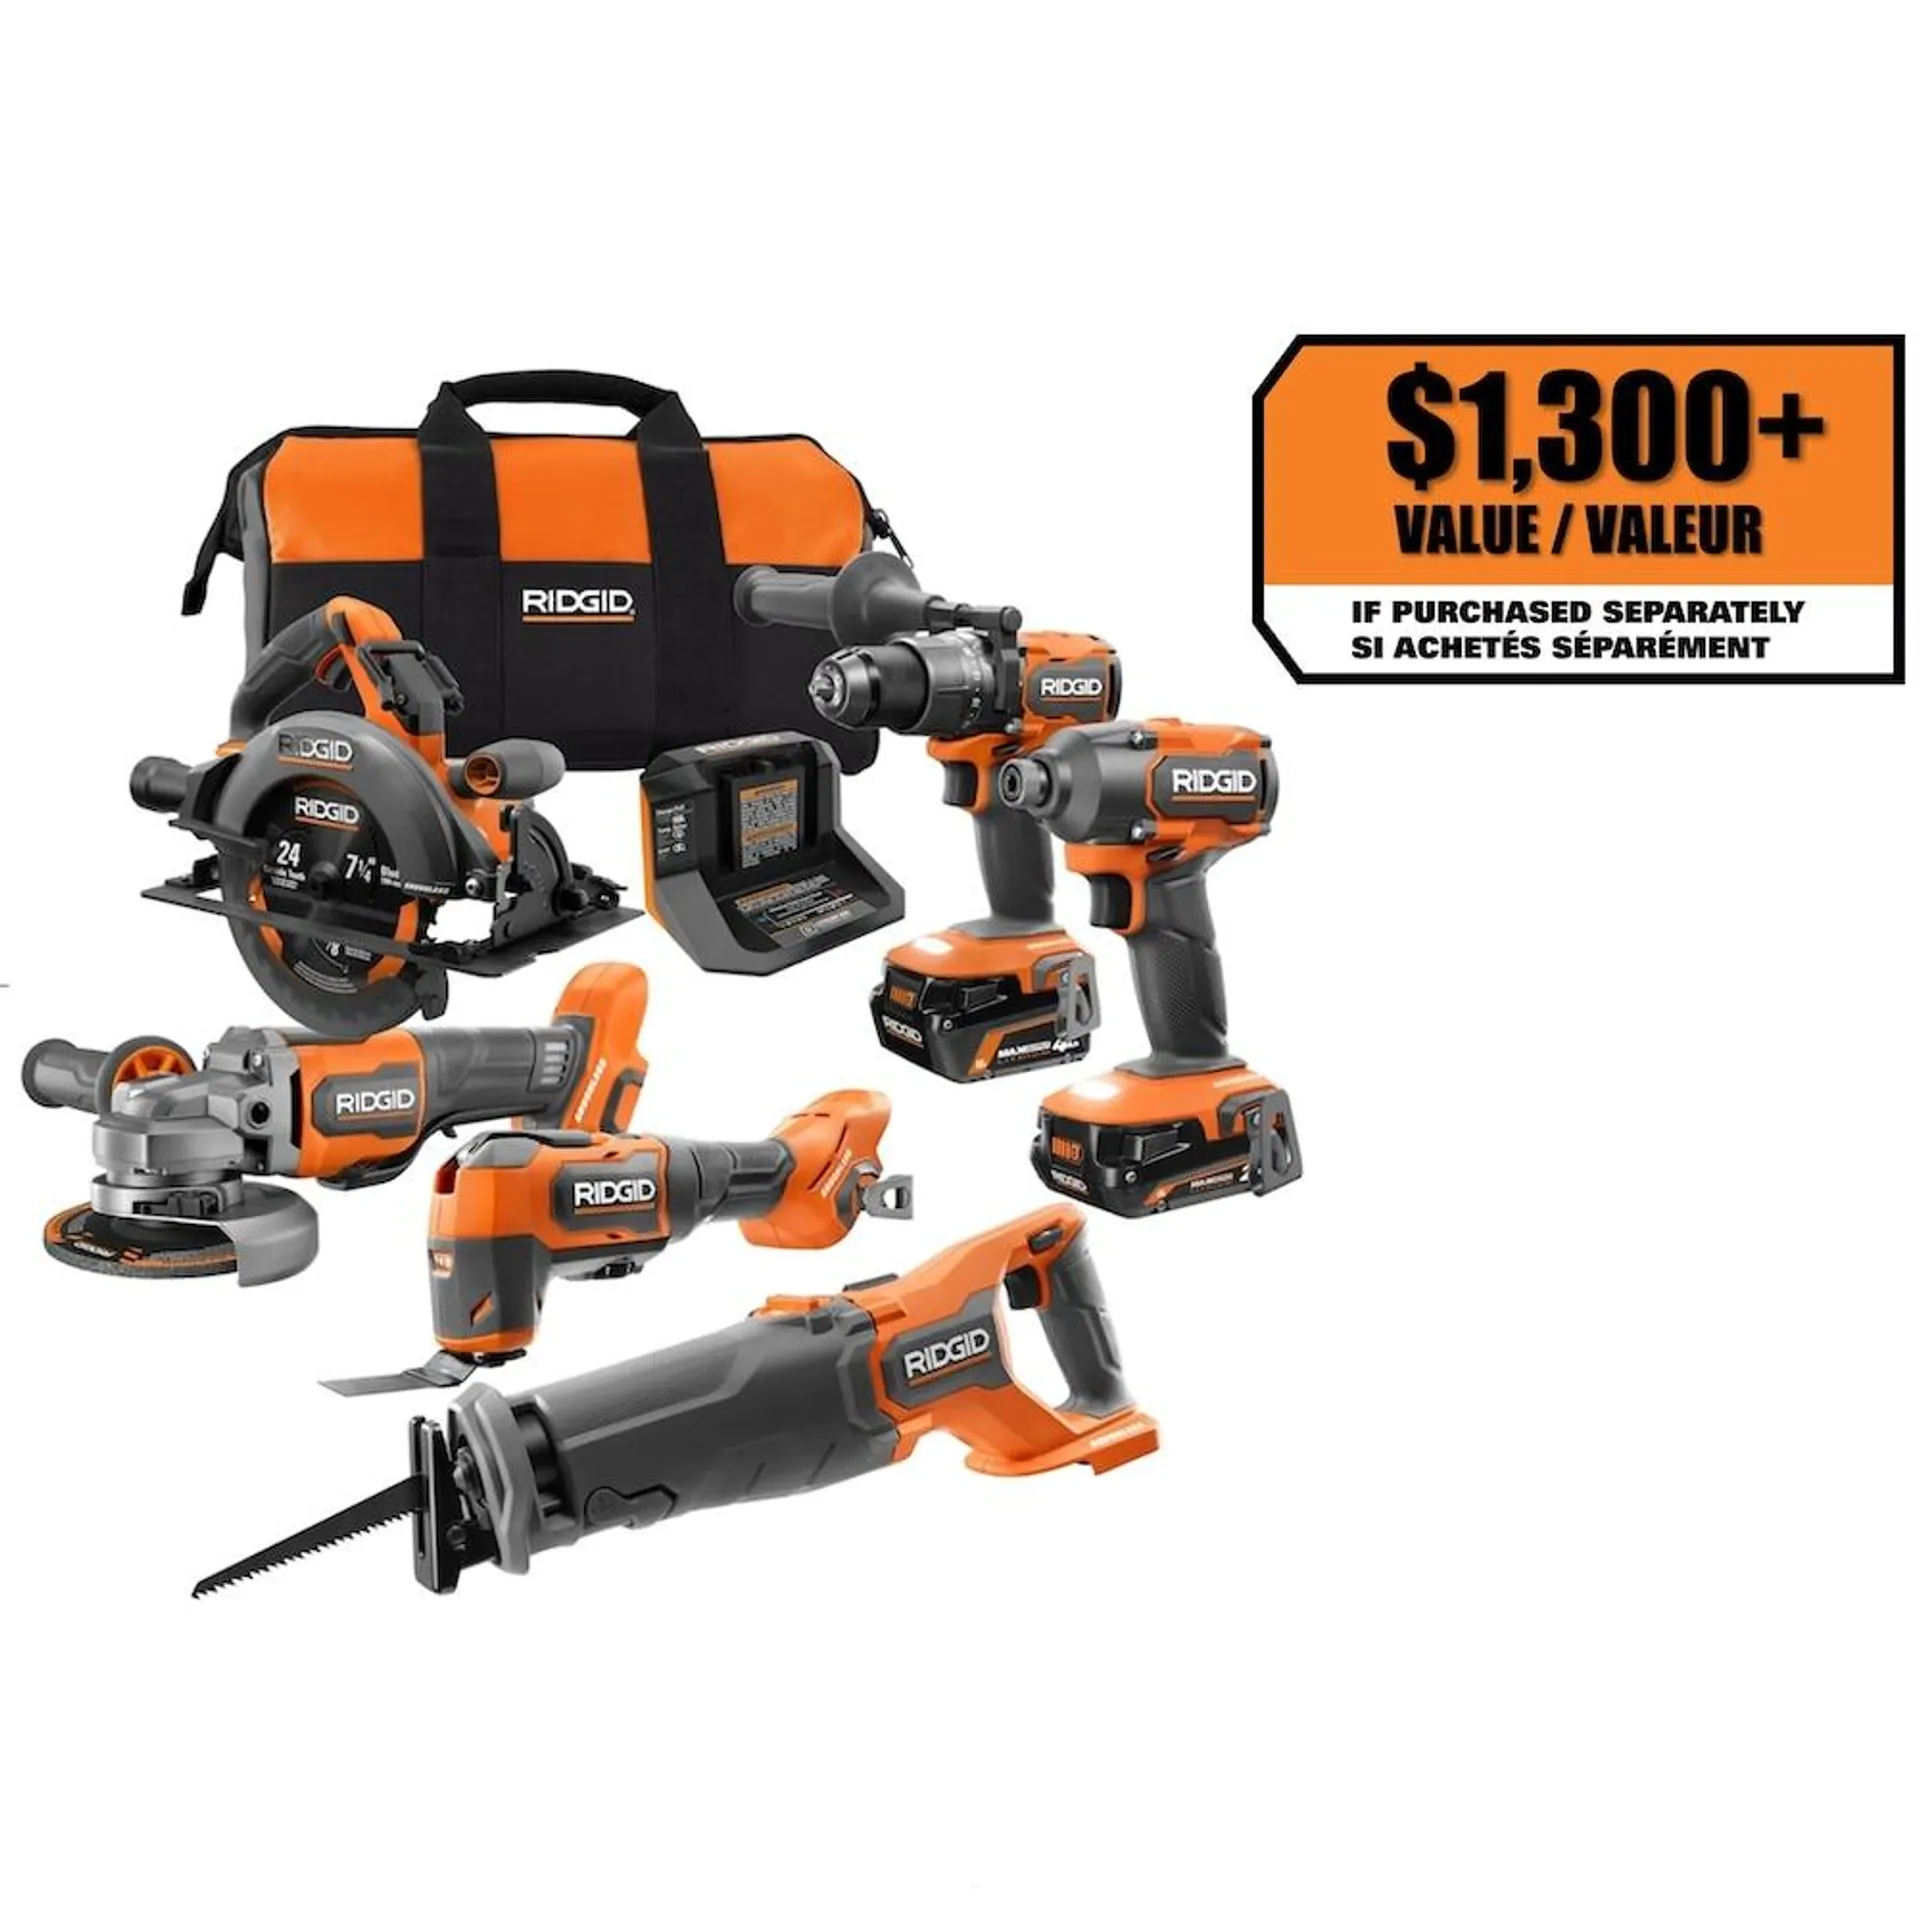 18V Brushless Cordless 6-Tool Kit with (1) 2.0 and (1) 4.0 Max Output Batteries and Charger